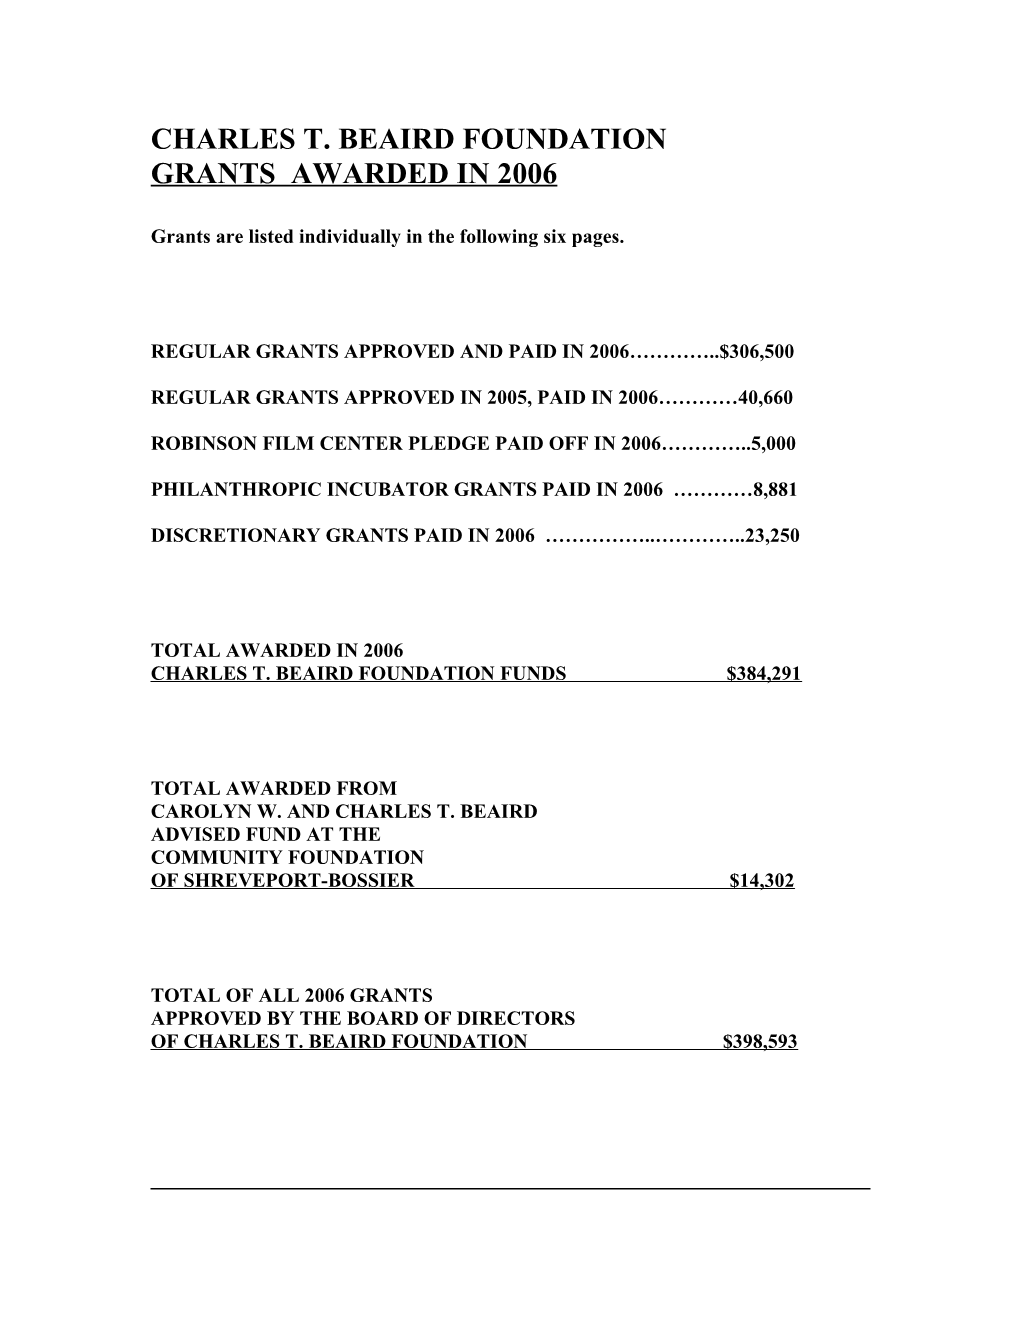 Grants Are Listed Individually in the Following Six Pages